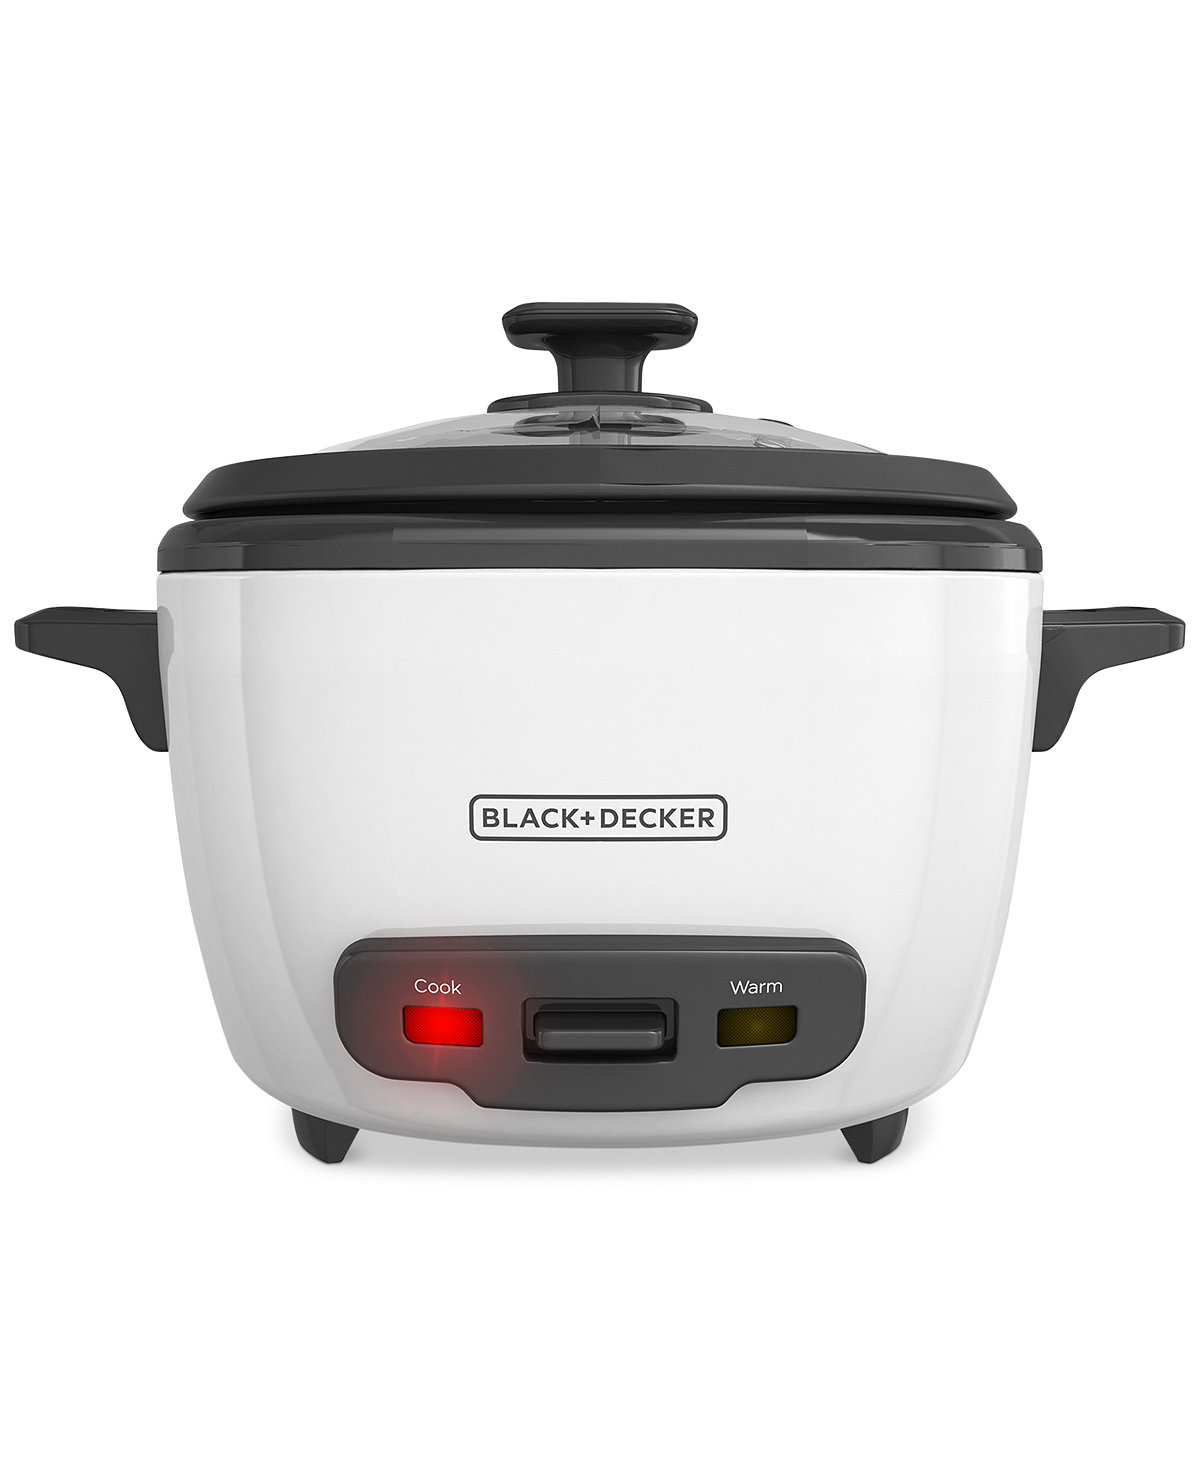 Black + Decker 16-cup rice cooker for $8 after rebate